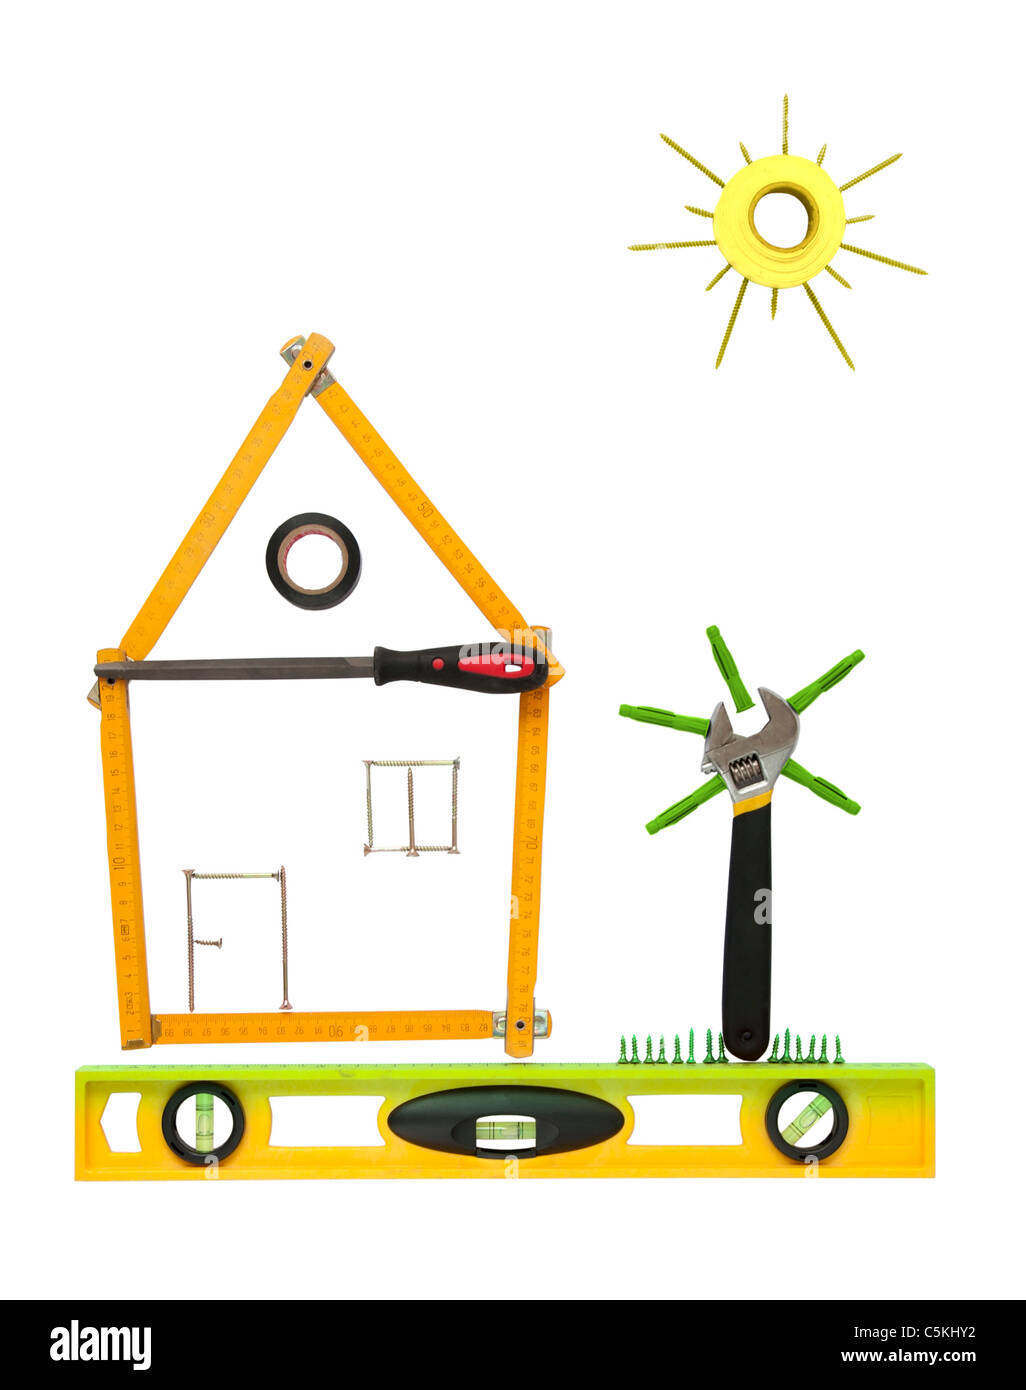 House with tree and sun made of tools for building.White isolated Stock Photo